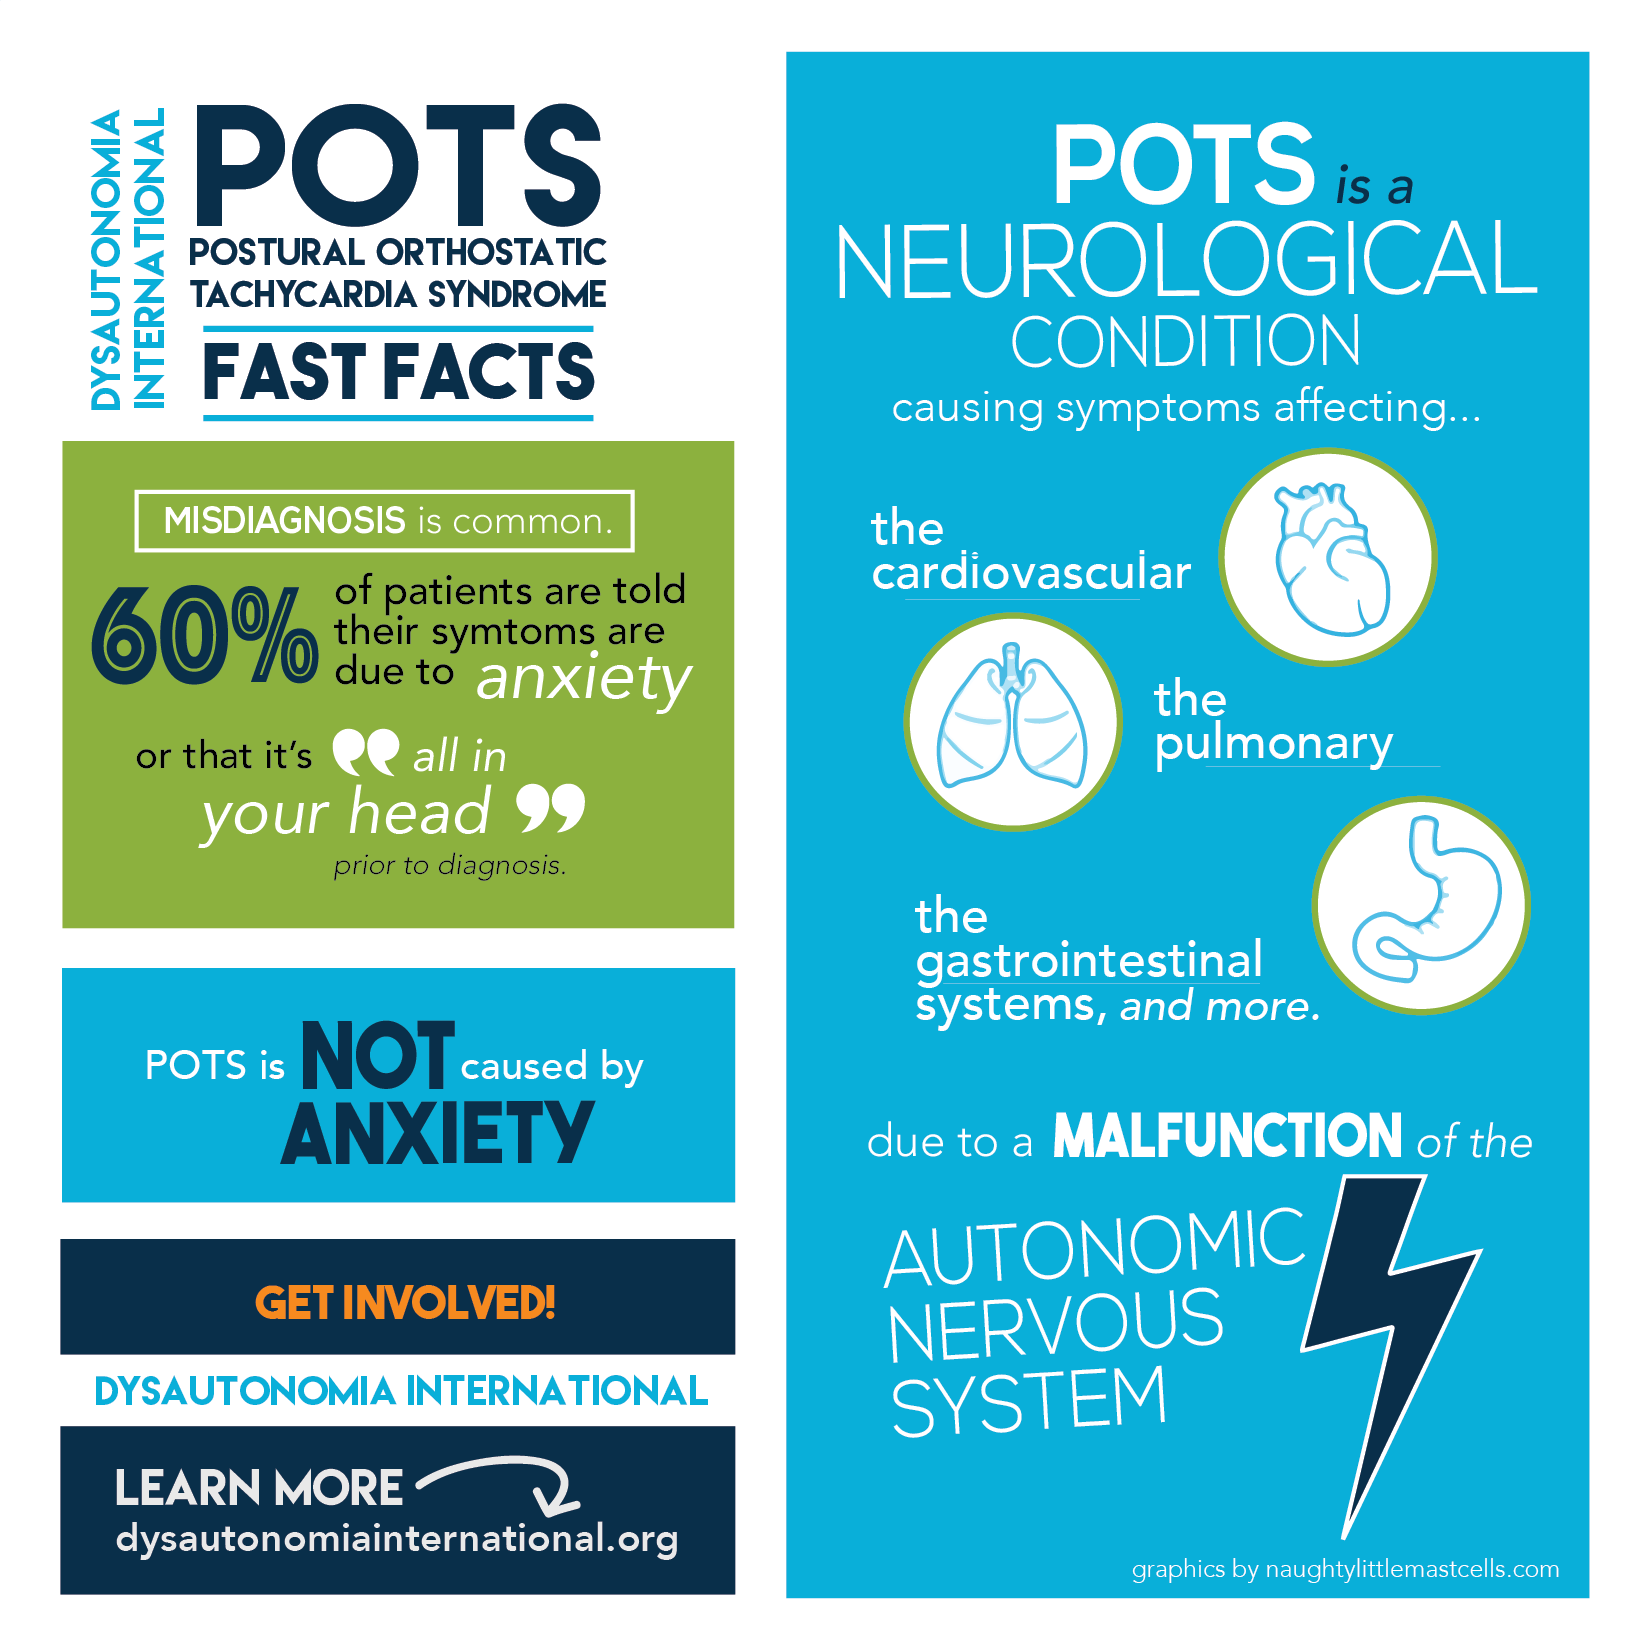 POTS is NOT anxiety